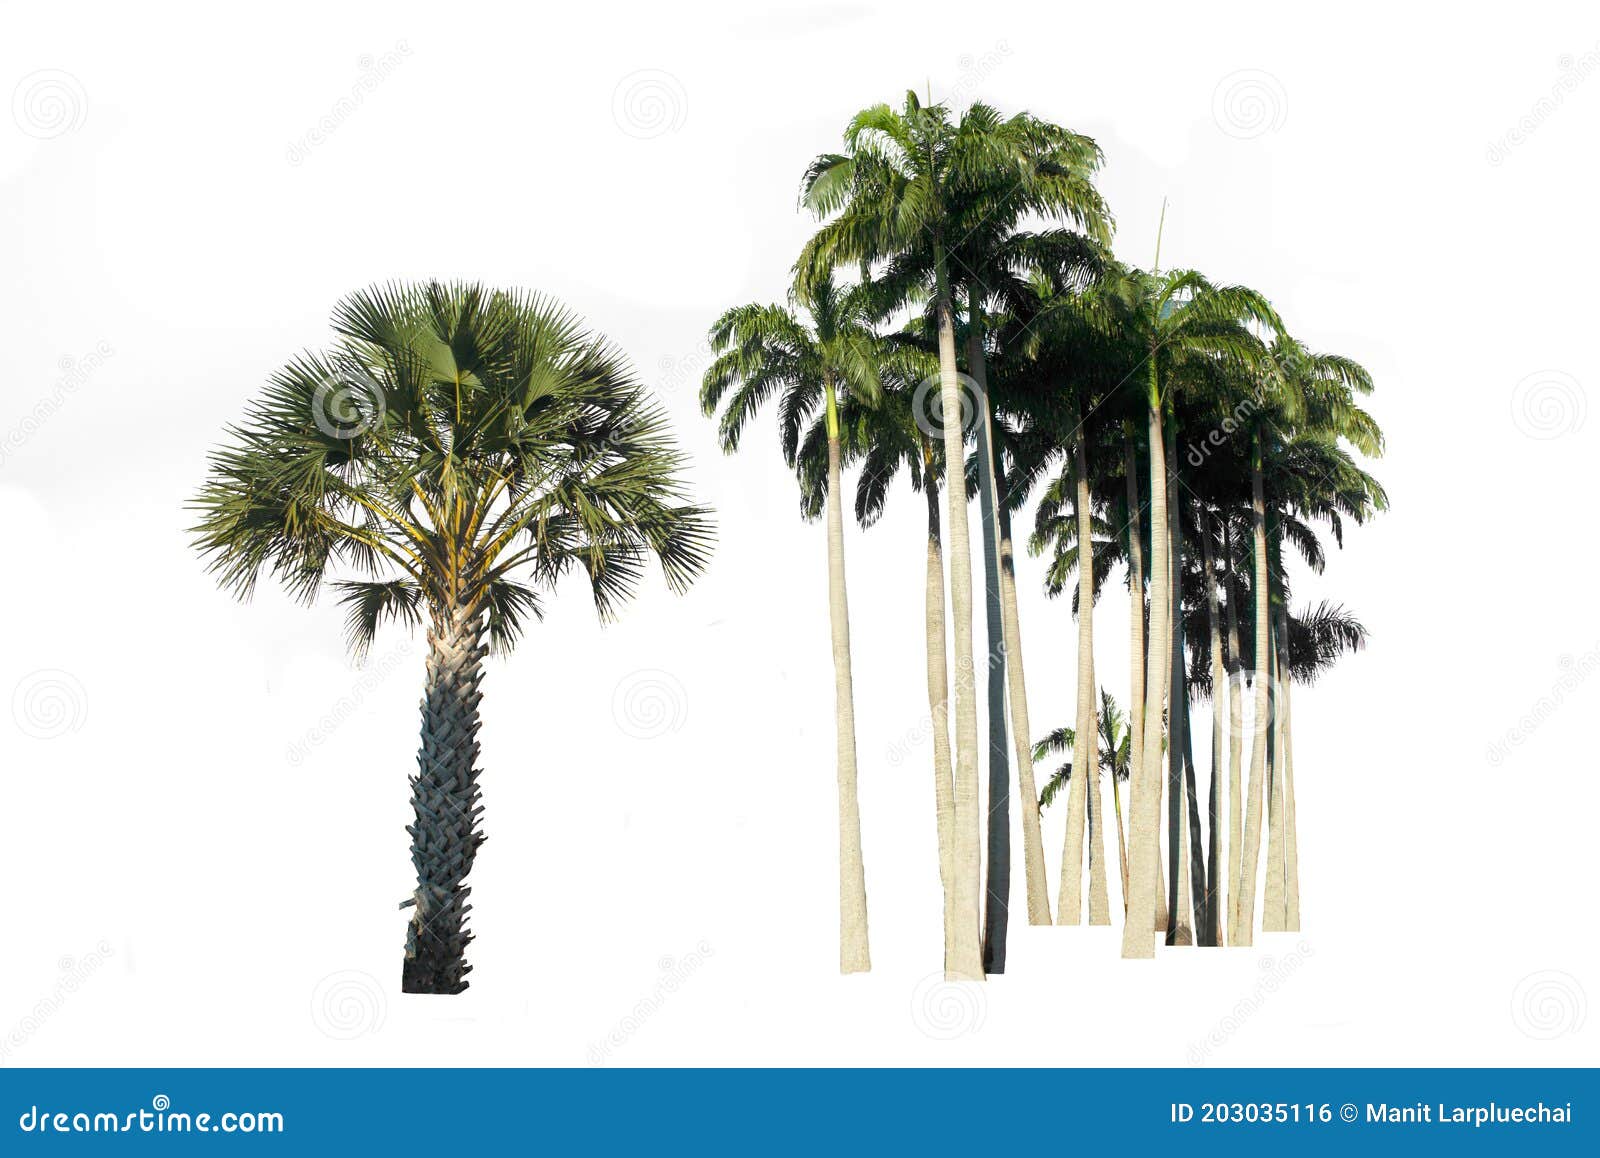 palm tree  on white background, with clipping path.